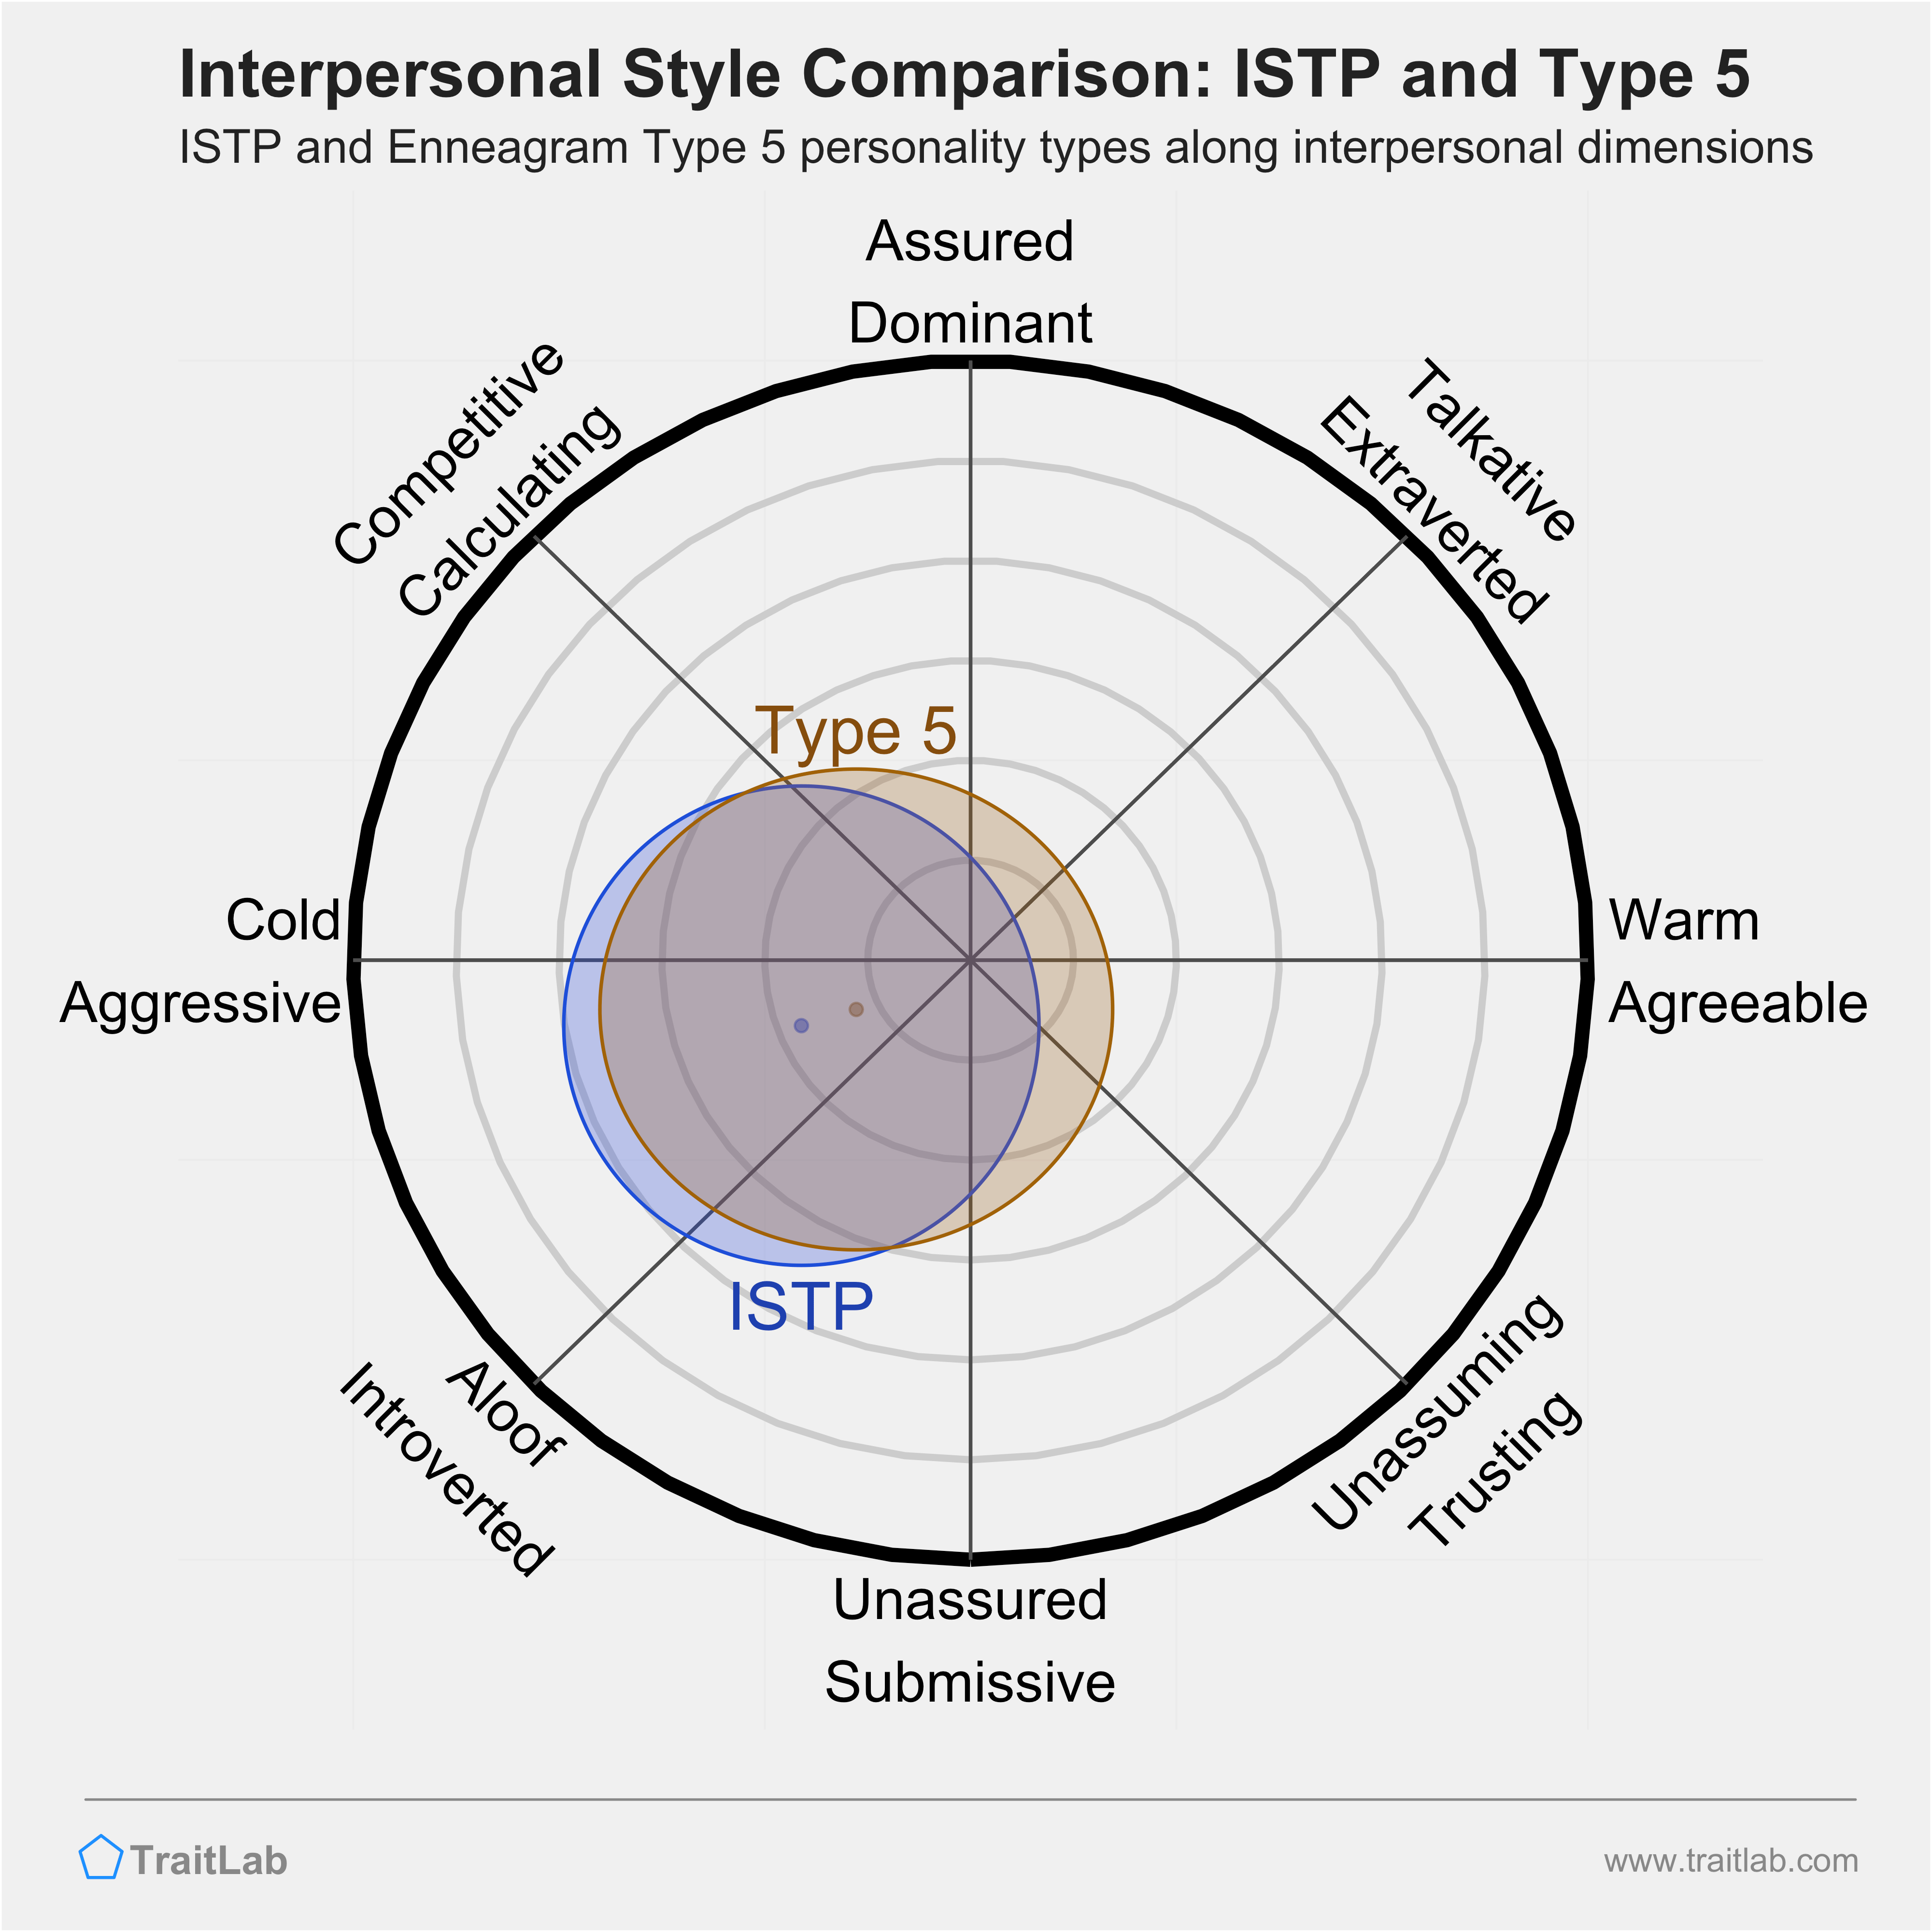 Enneagram ISTP and Type 5 comparison across interpersonal dimensions